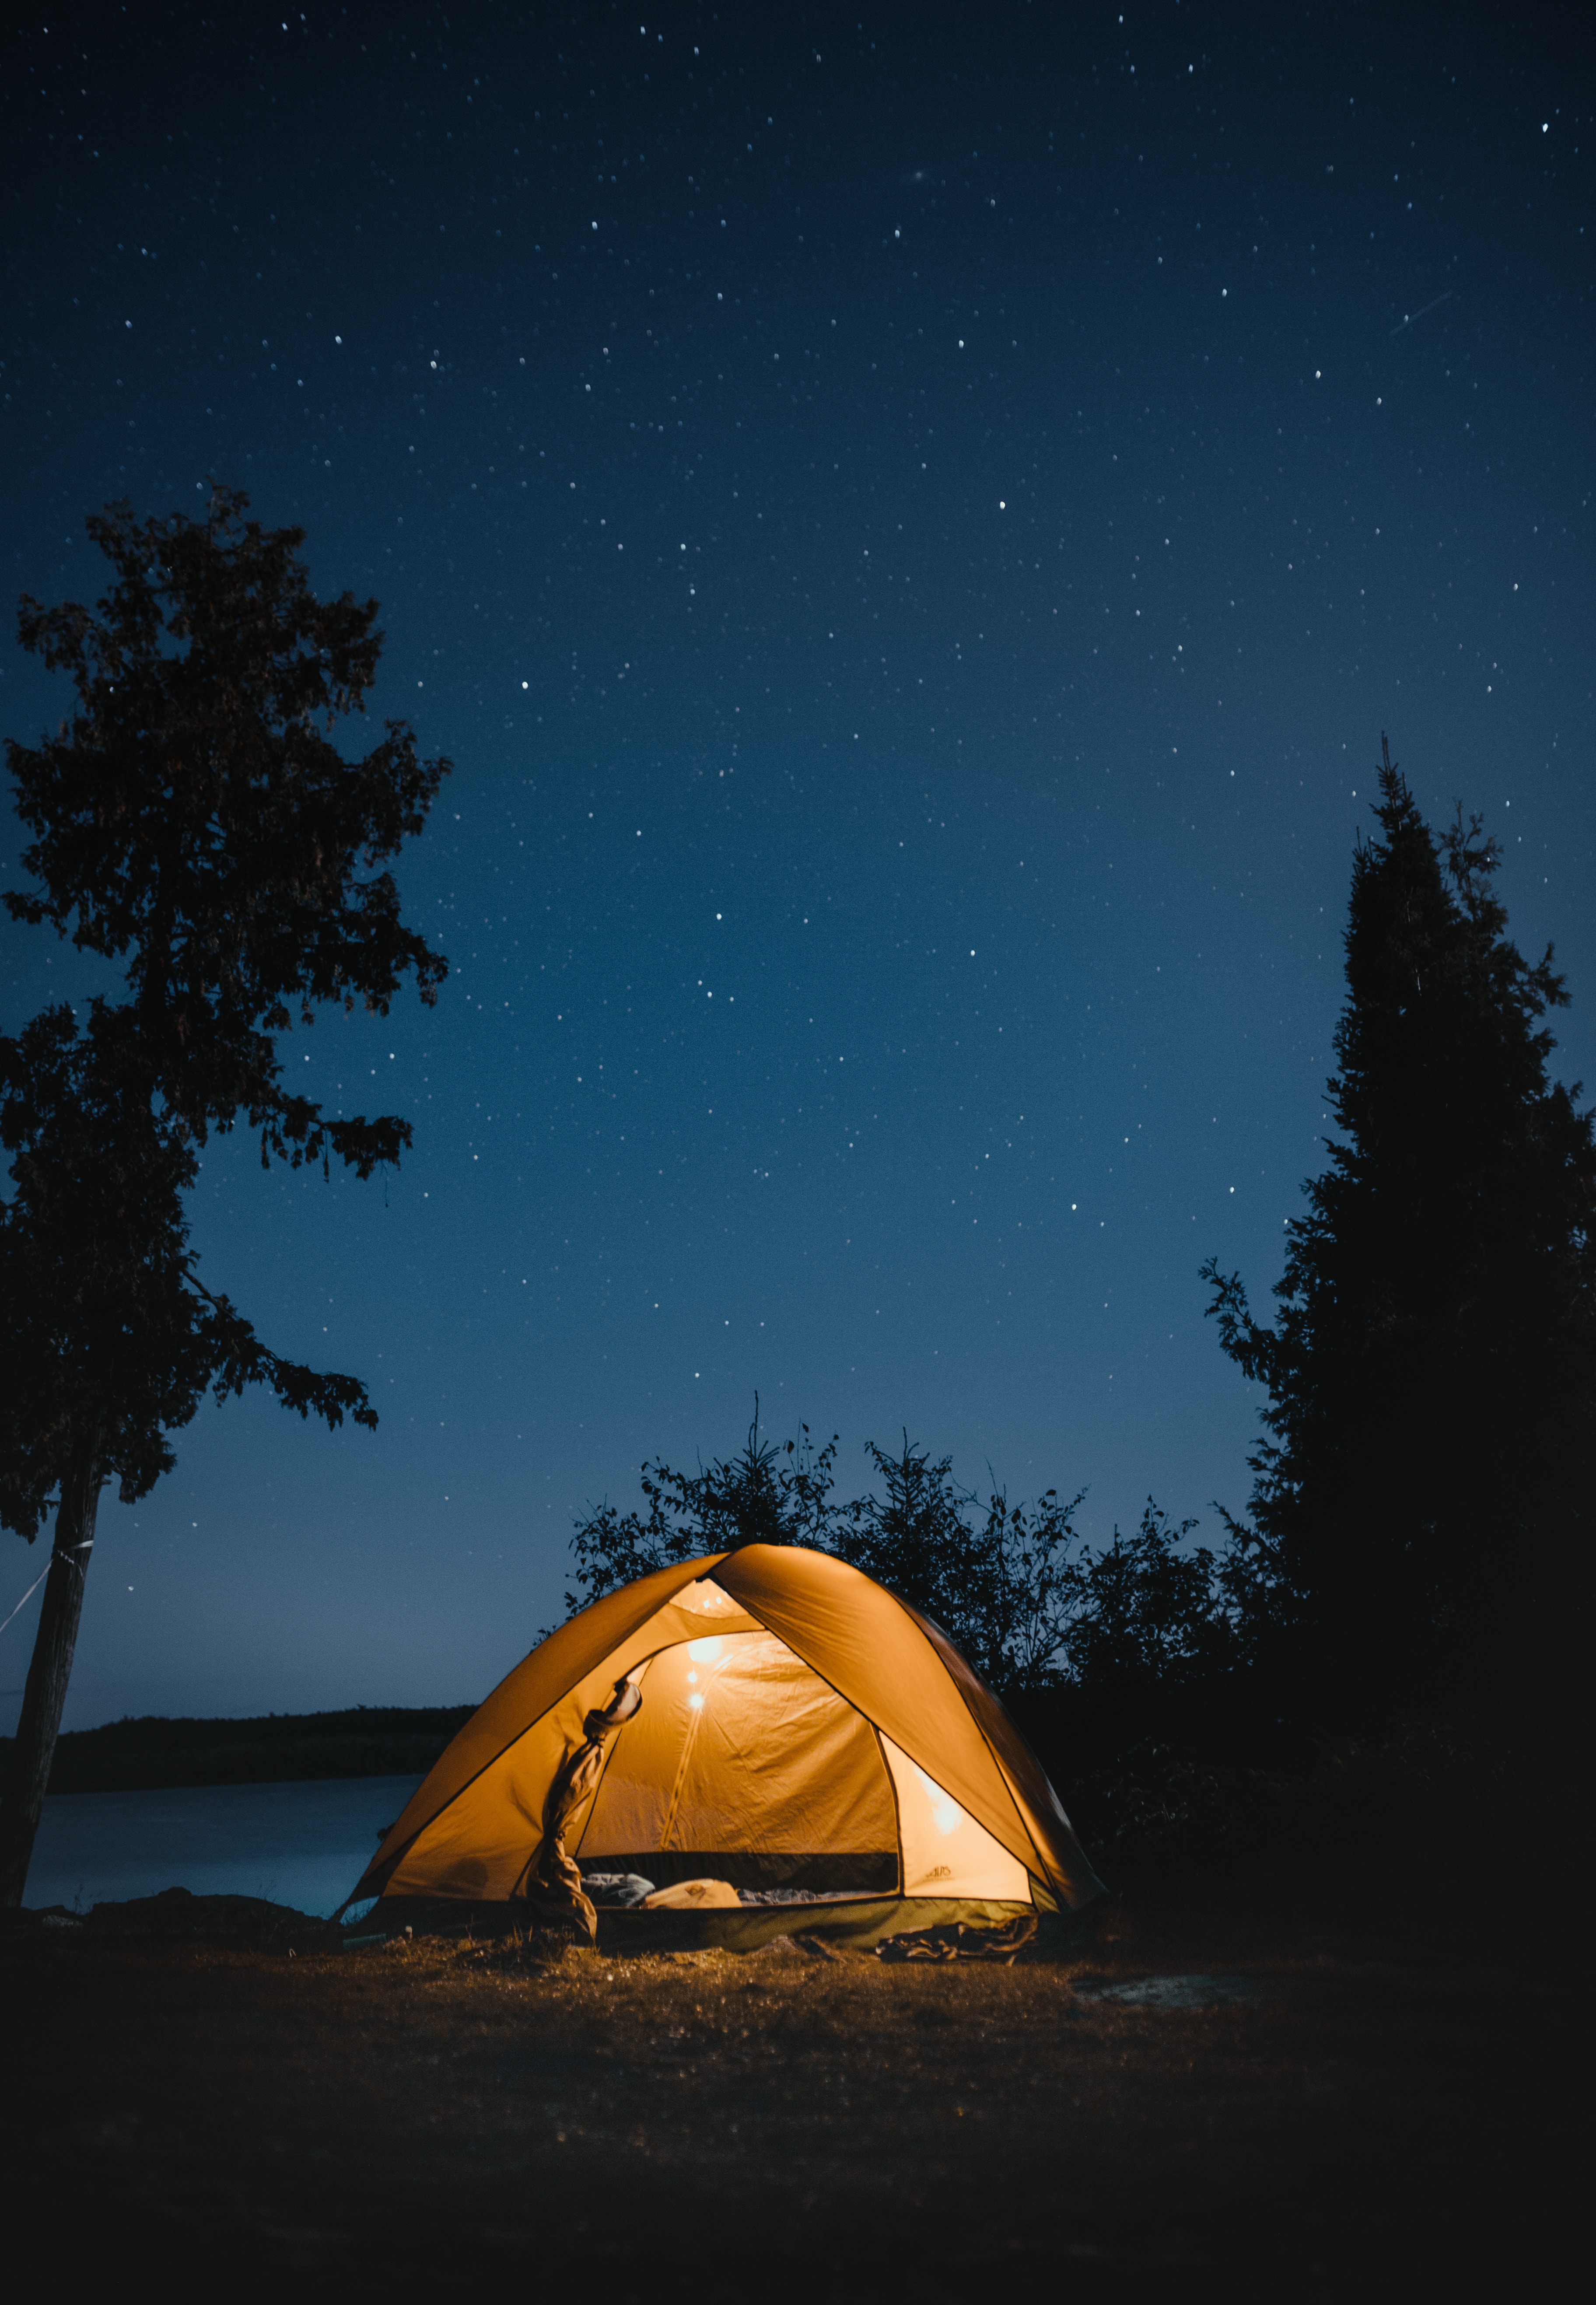 125104 Screensavers and Wallpapers Journey for phone. Download starry sky, tent, nature, night, journey, camping, campsite pictures for free